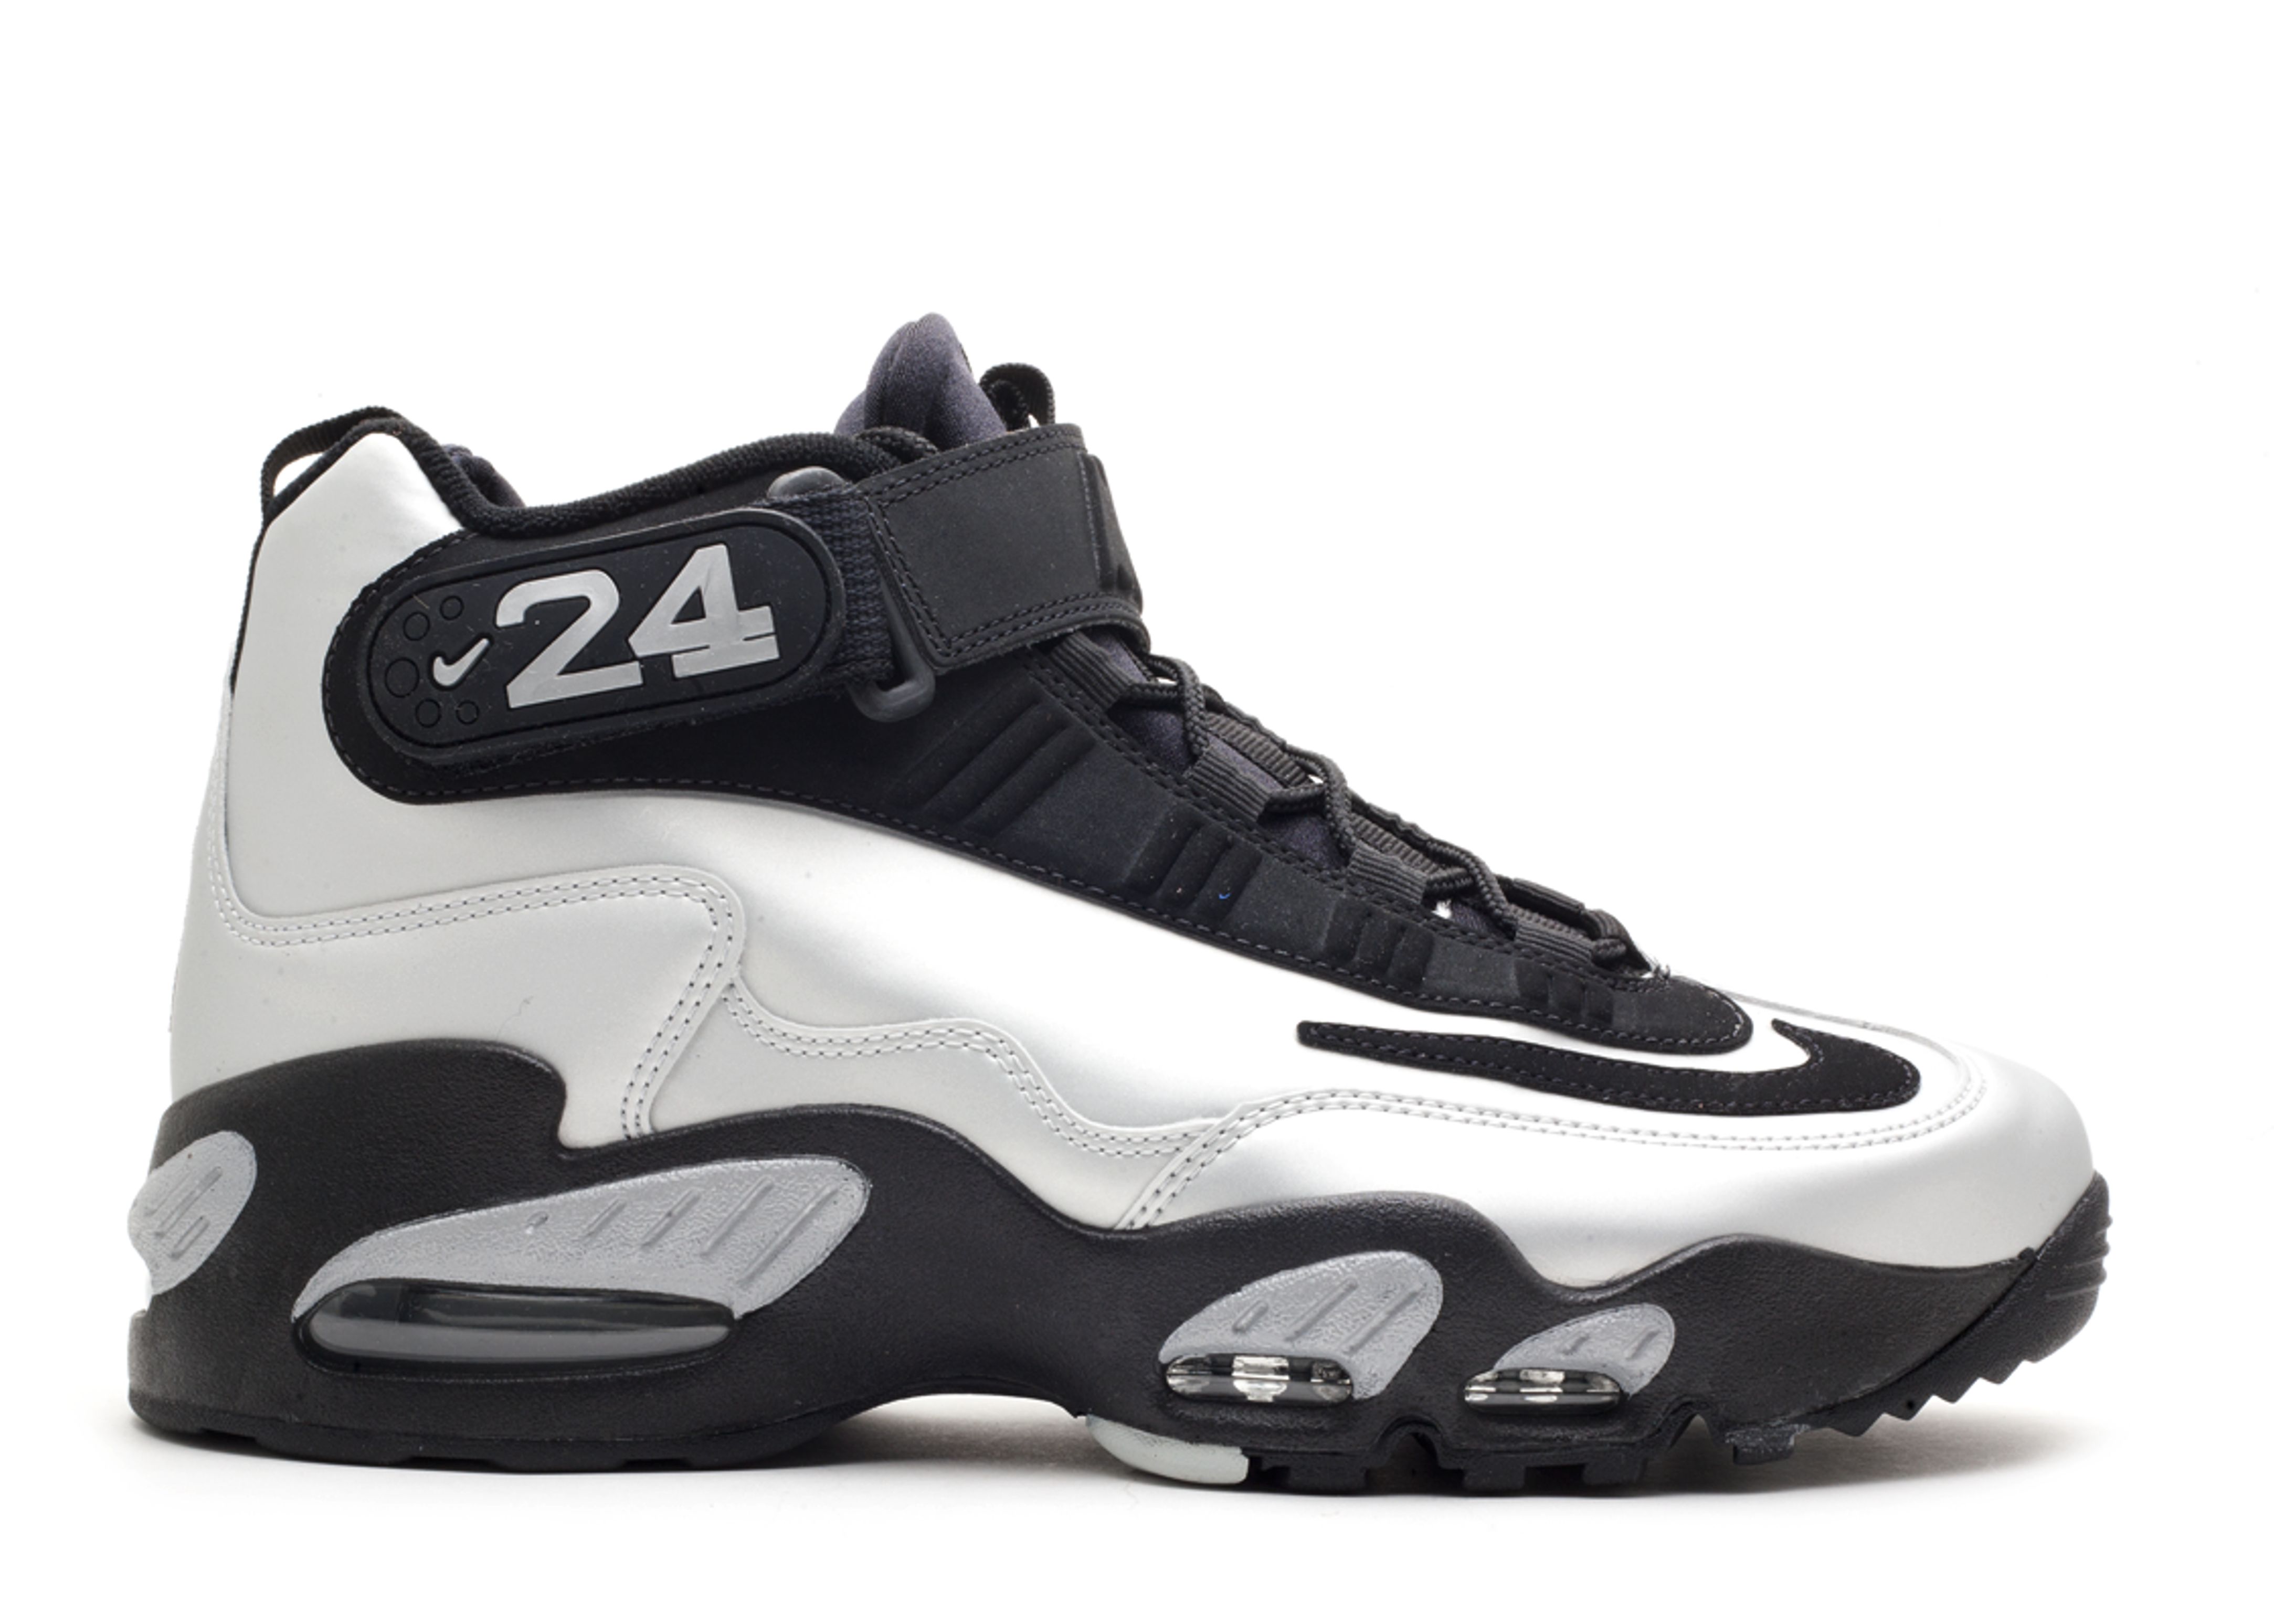 griffey shoes max 1